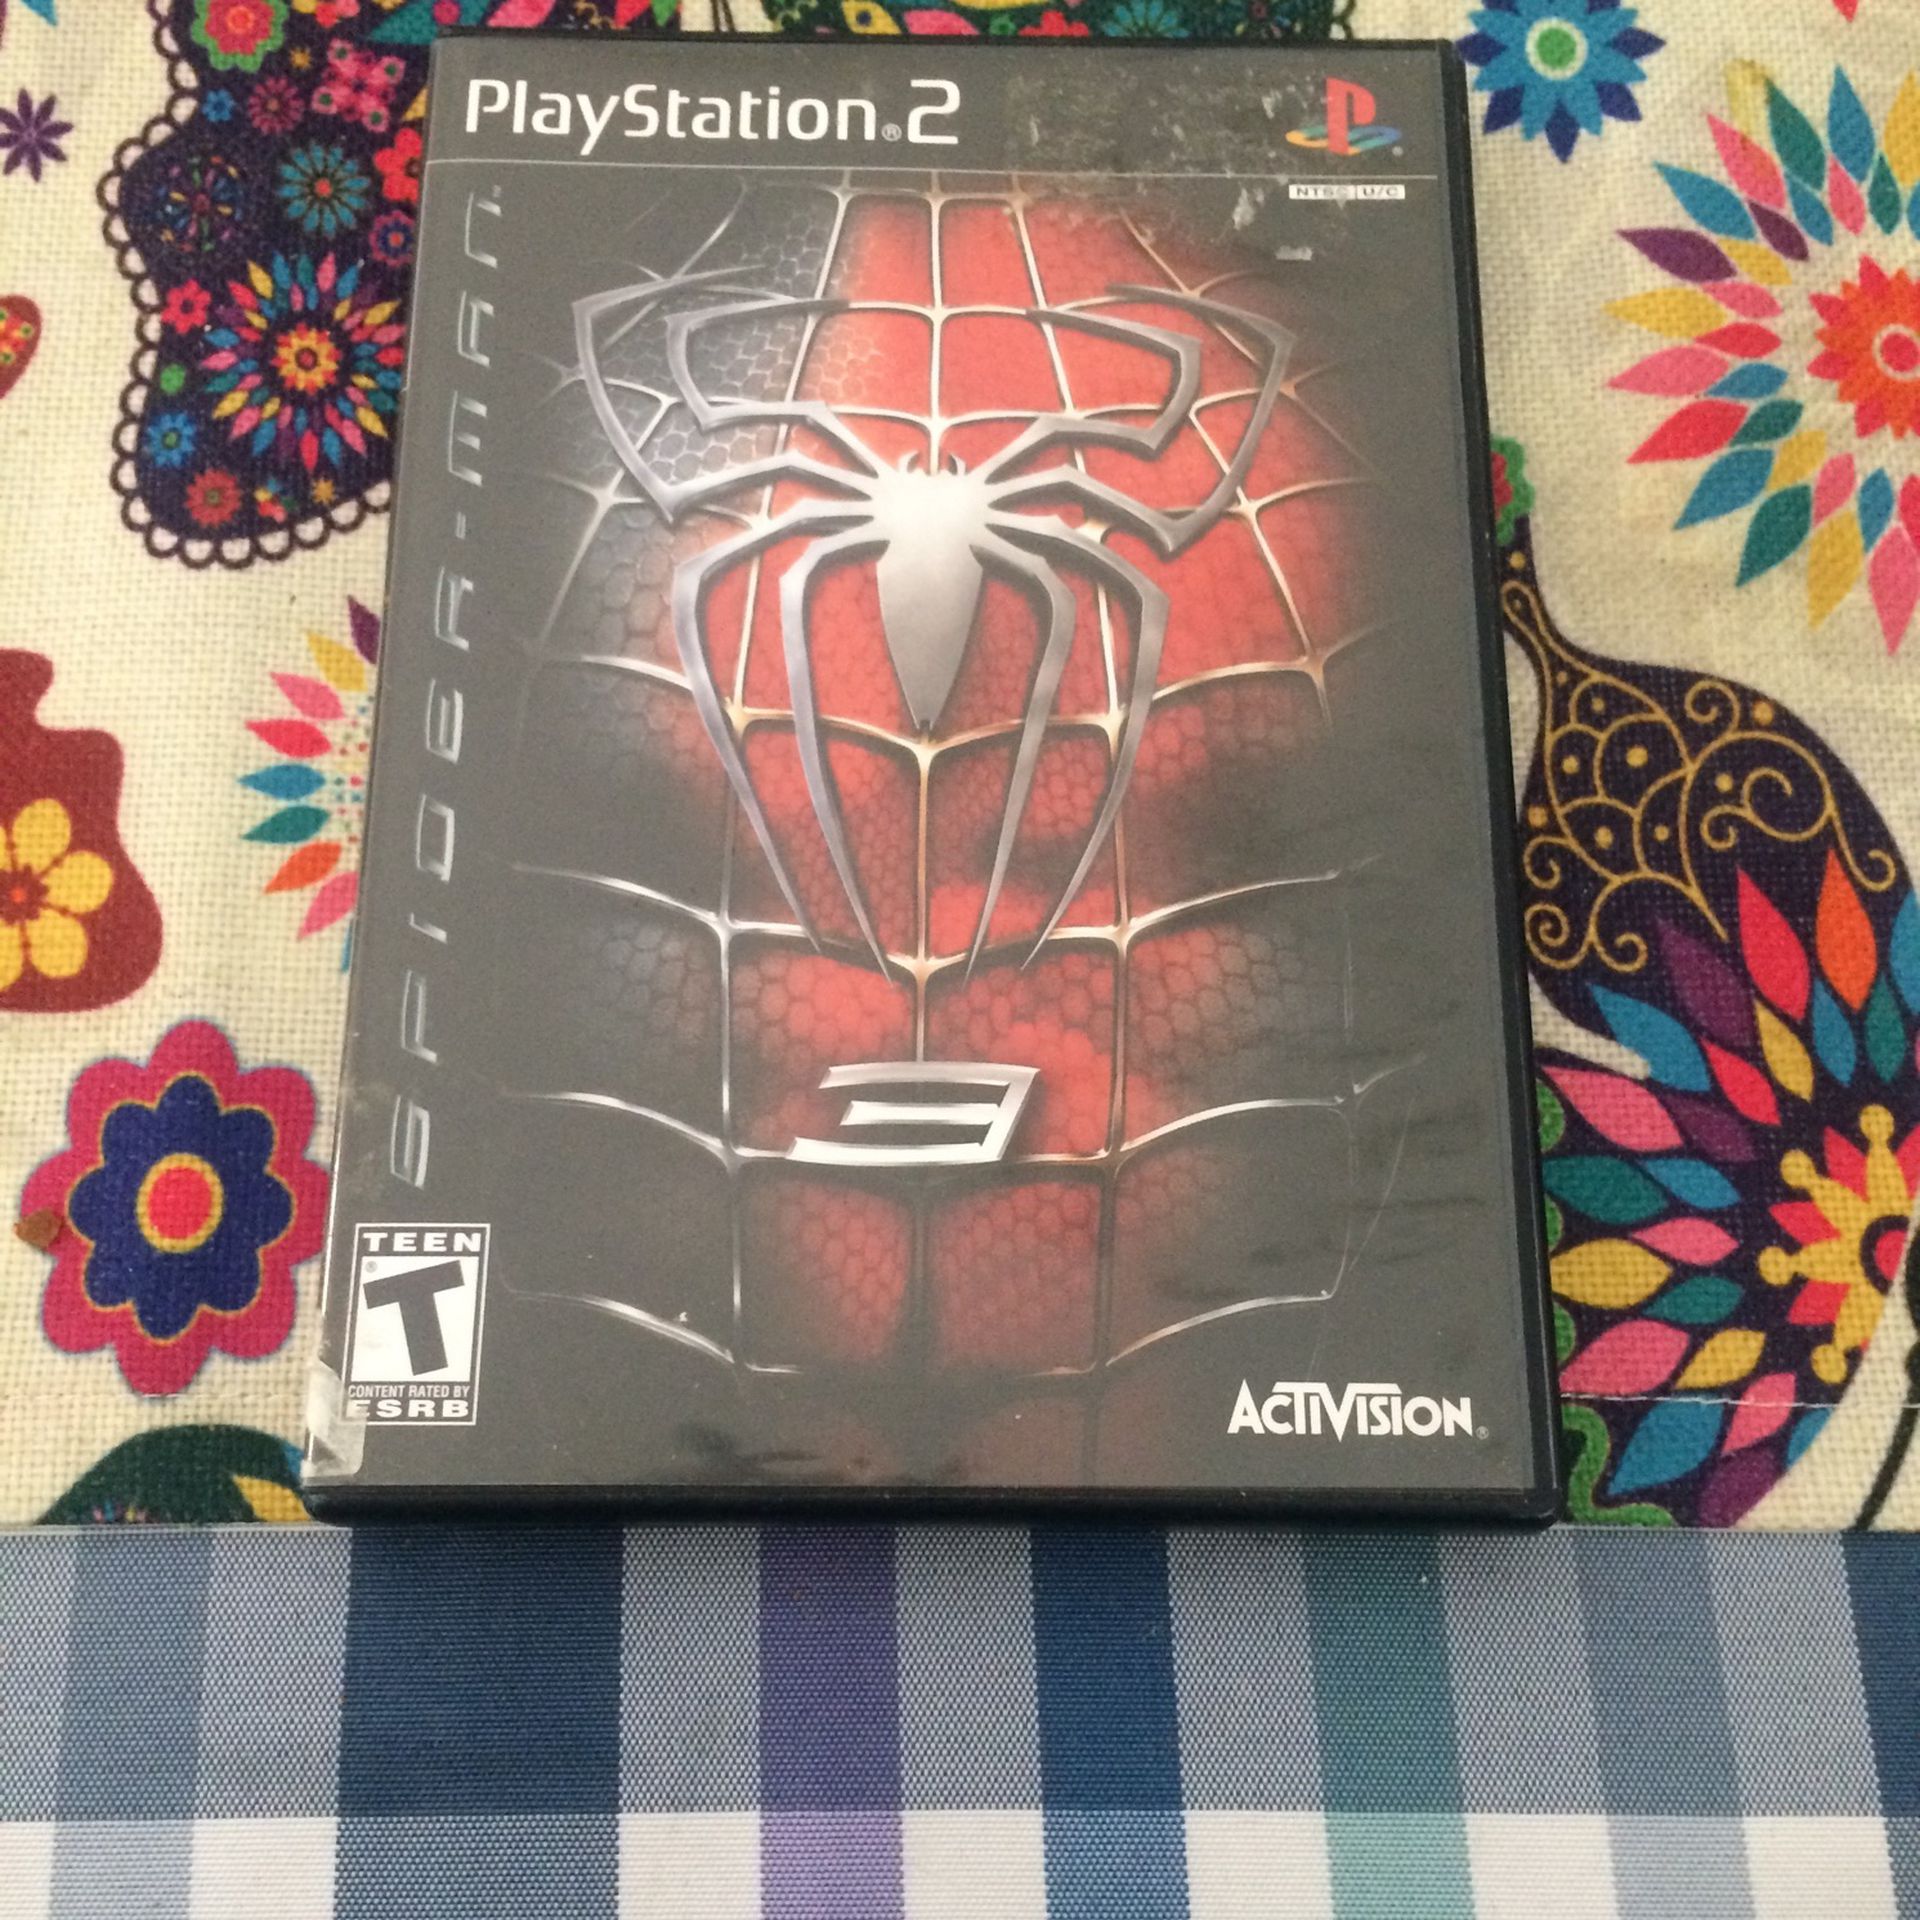 ####Spiderman 3 (PlayStation 2) Video Game####